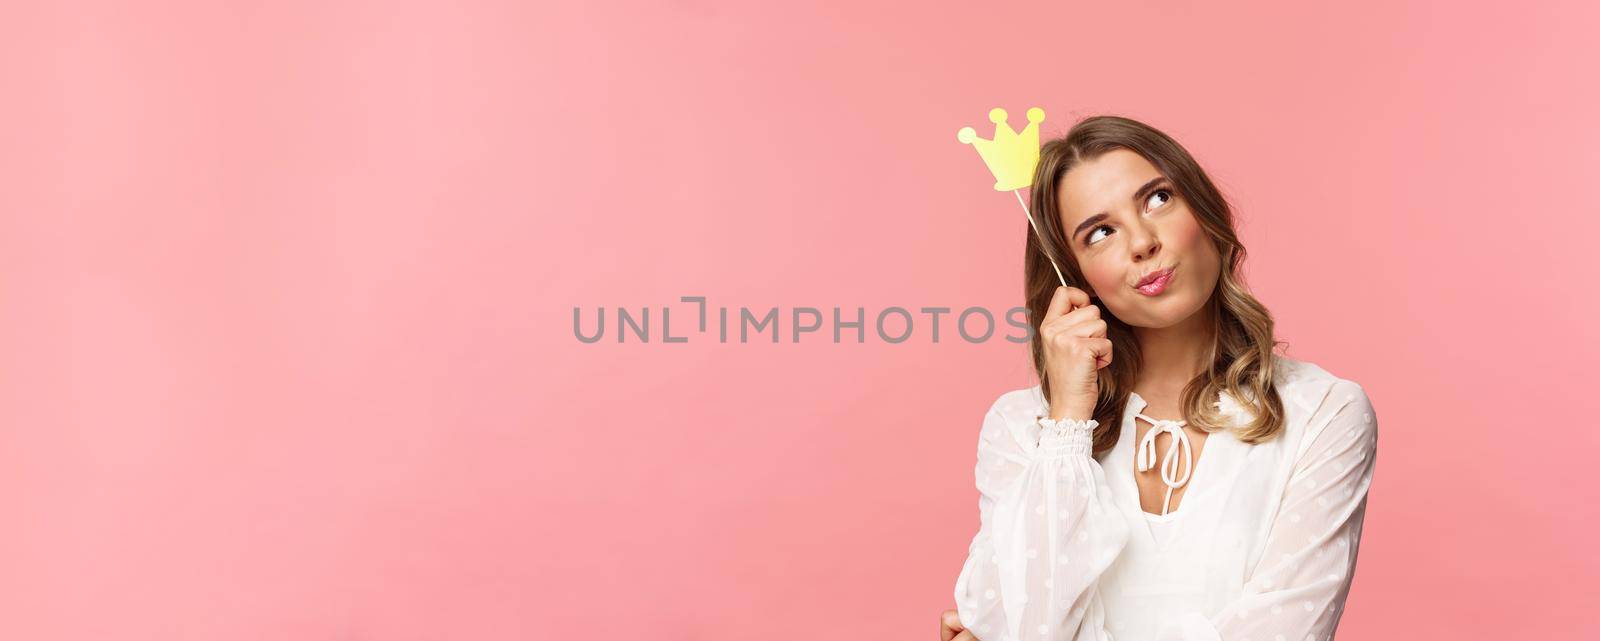 Spring, happiness and celebration concept. Close-up portrait of thoughtful young confident and attractive girl feeling like queen of night party, daydreaming, thinking with crown mask on head.